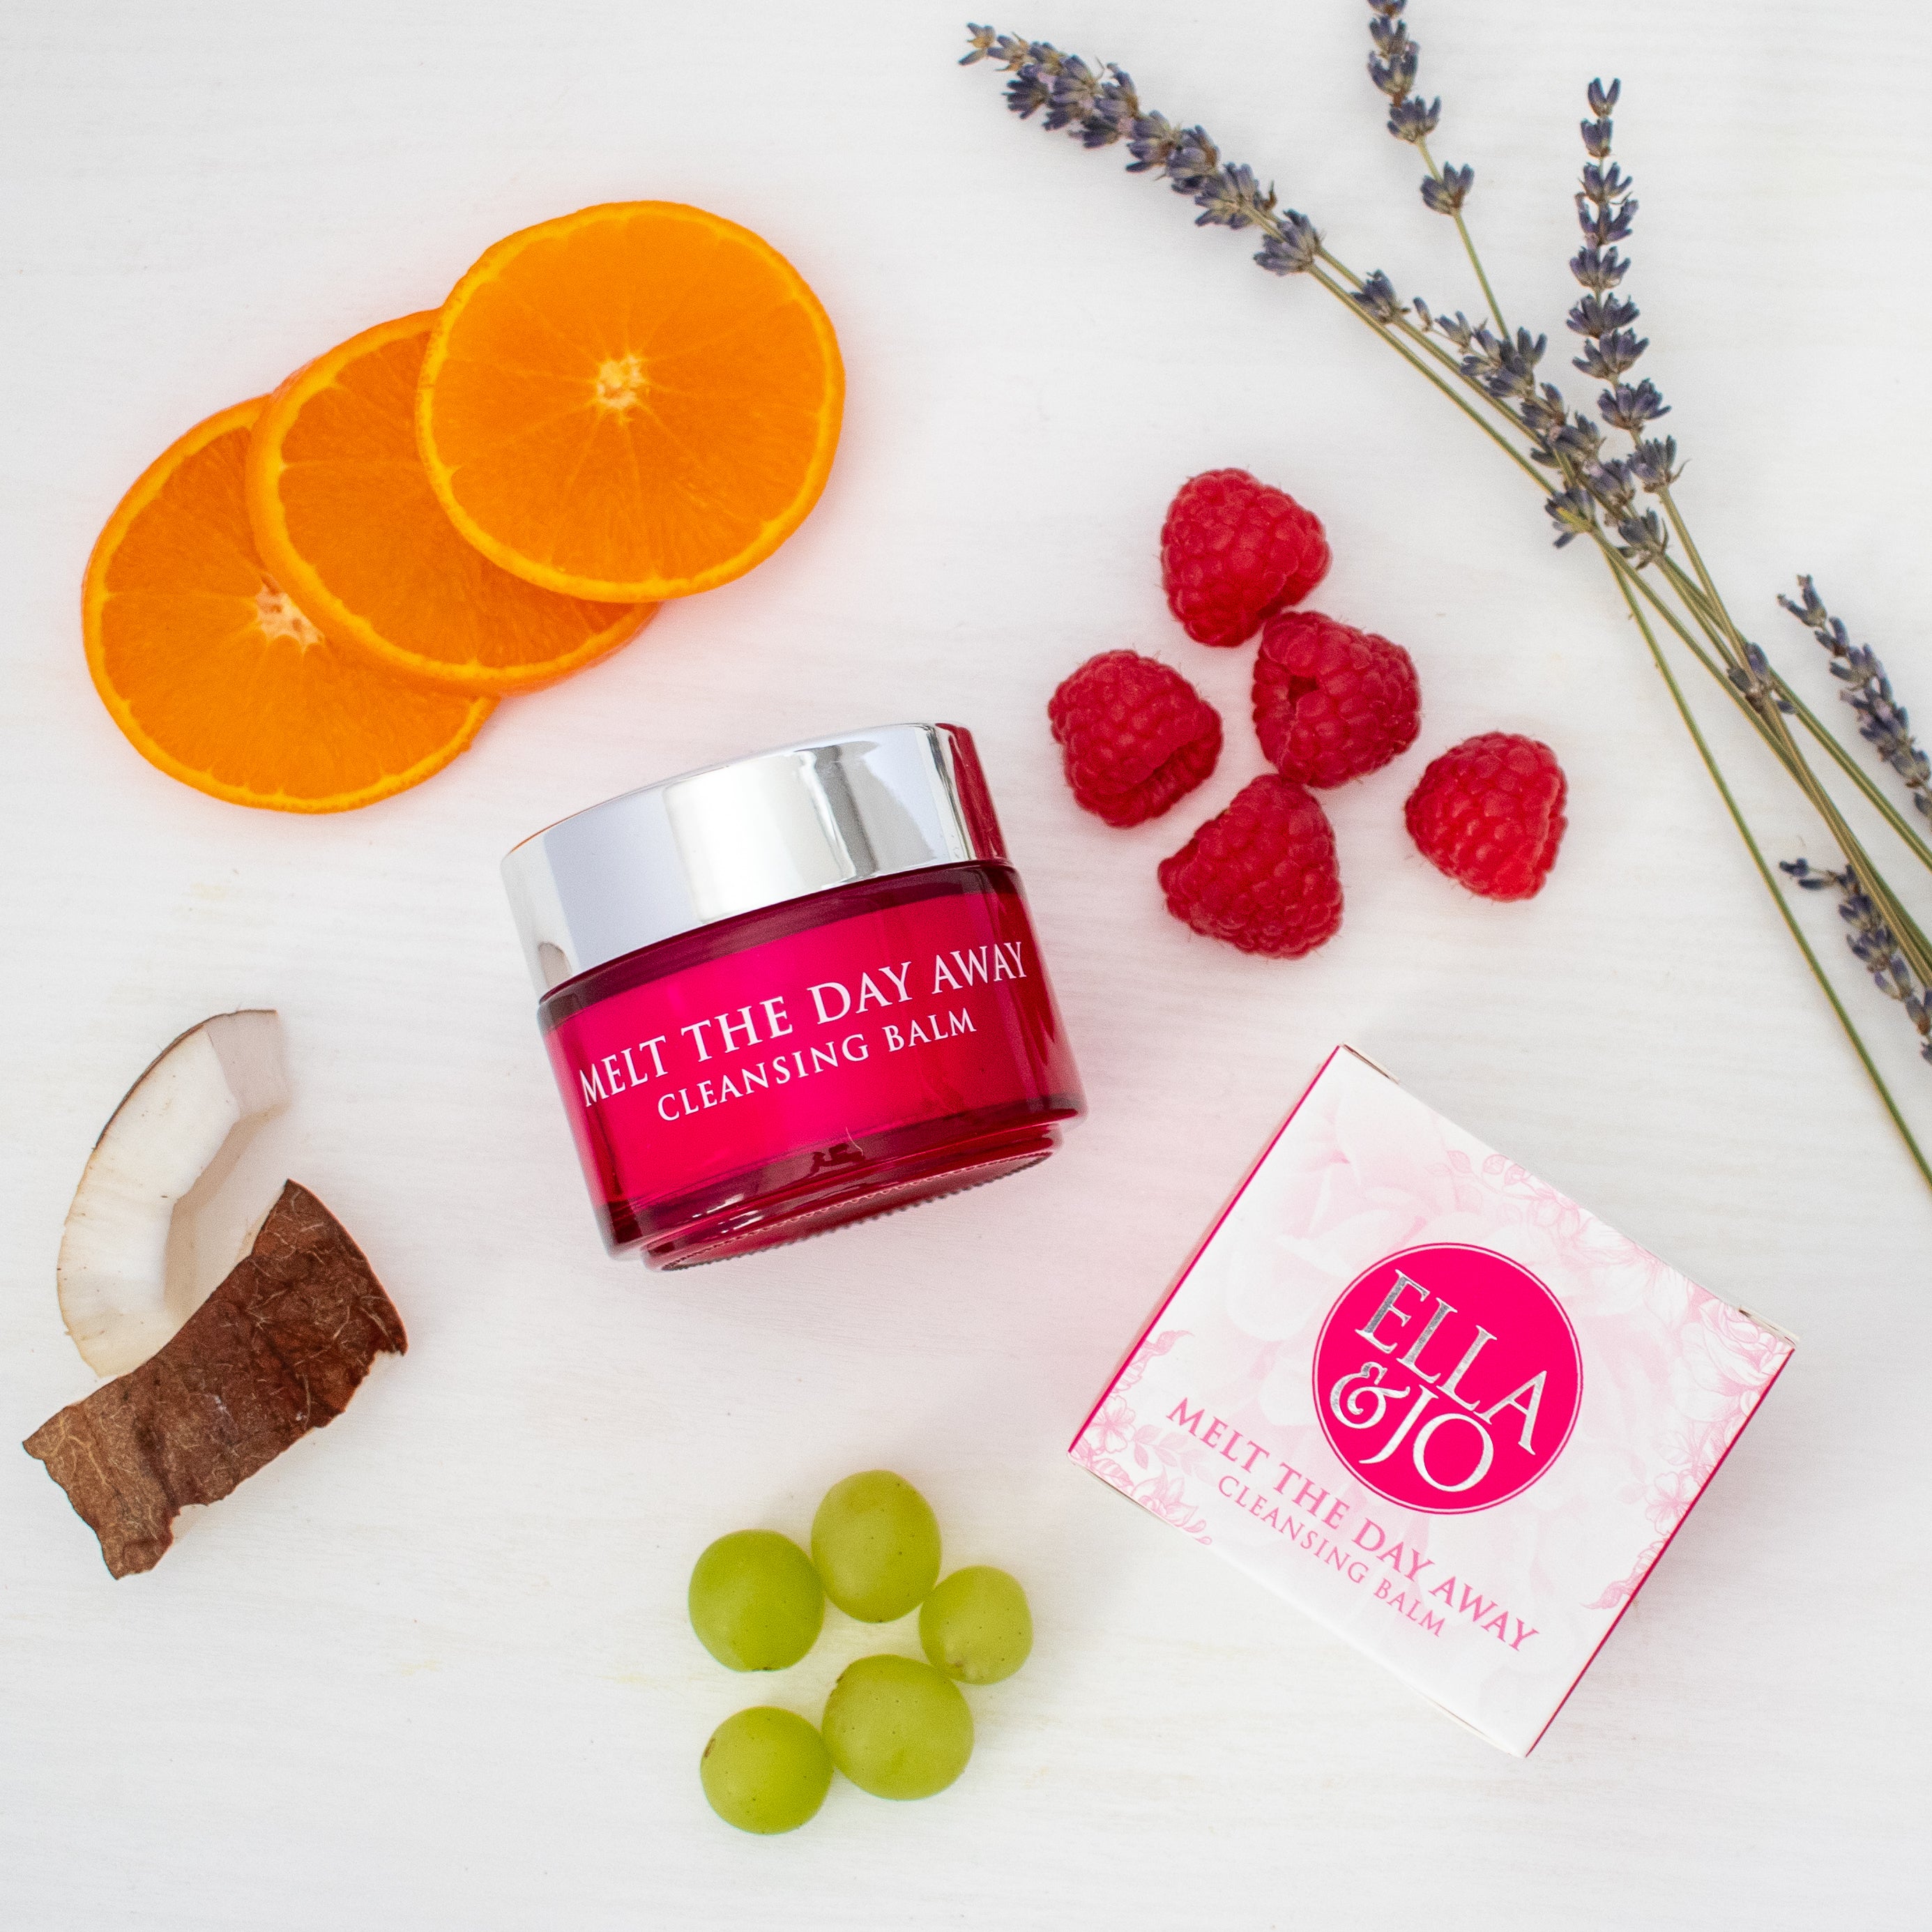 Ella and Jo Melt The Day Away - Cleansing Balm